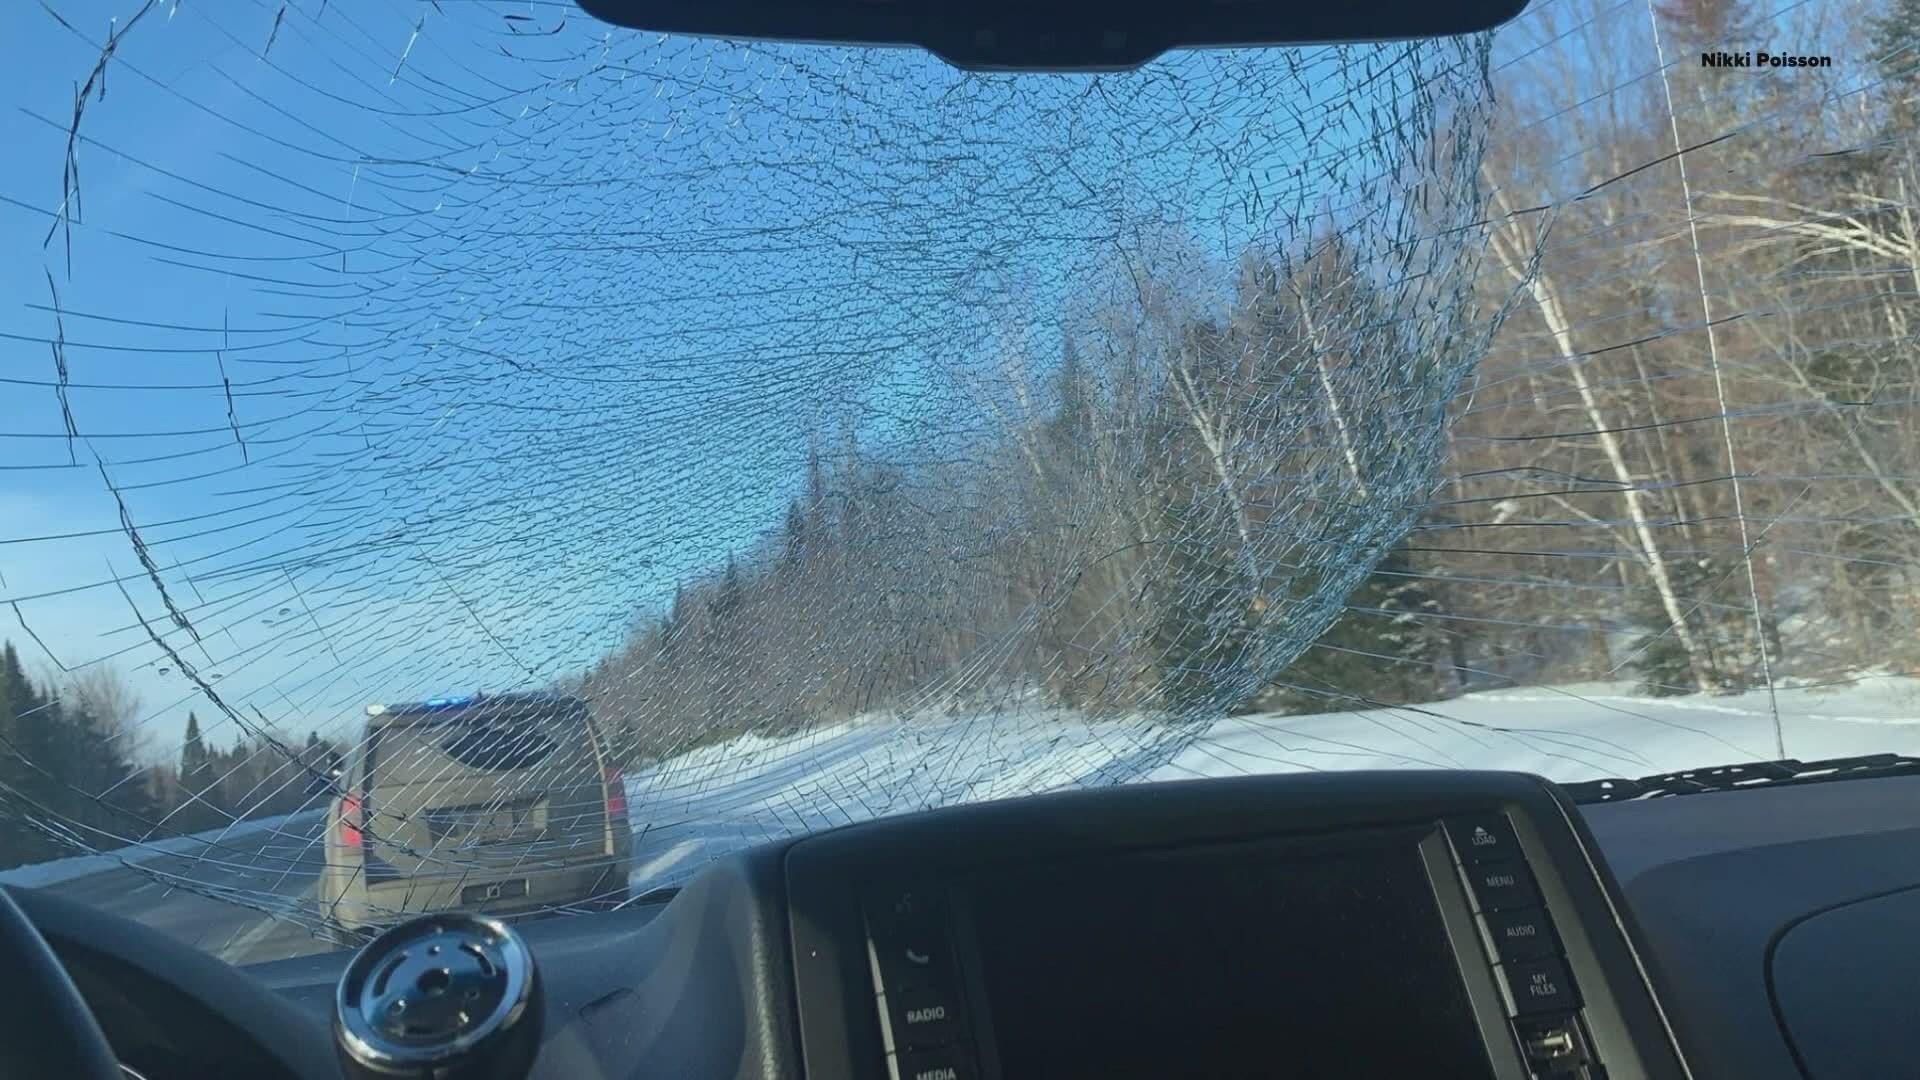 A new bill would require ice/snow removal from vehicle roofs in Maine